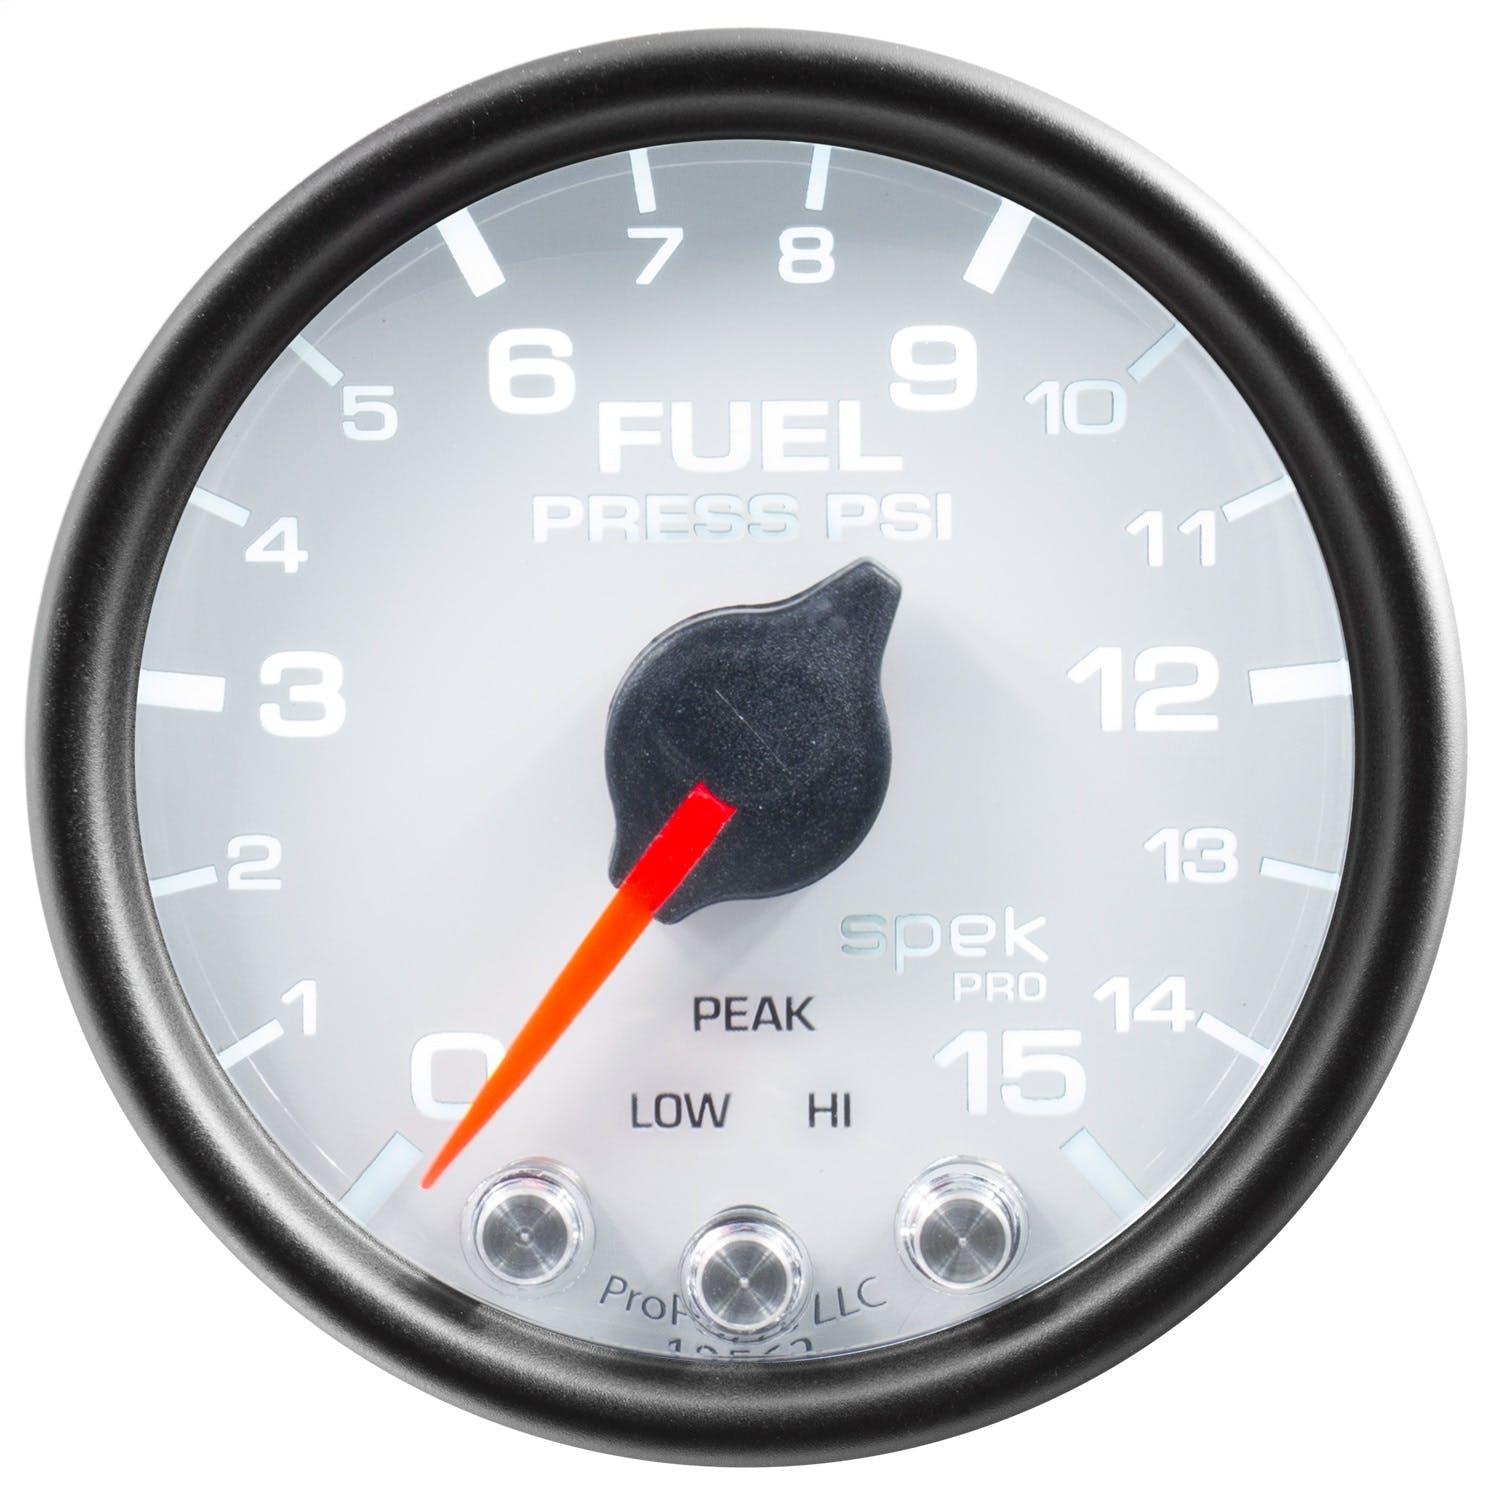 AutoMeter Products P31512 Fuel Pressure Gauge, 2 1/16, 15PSI, Stepper Motor White